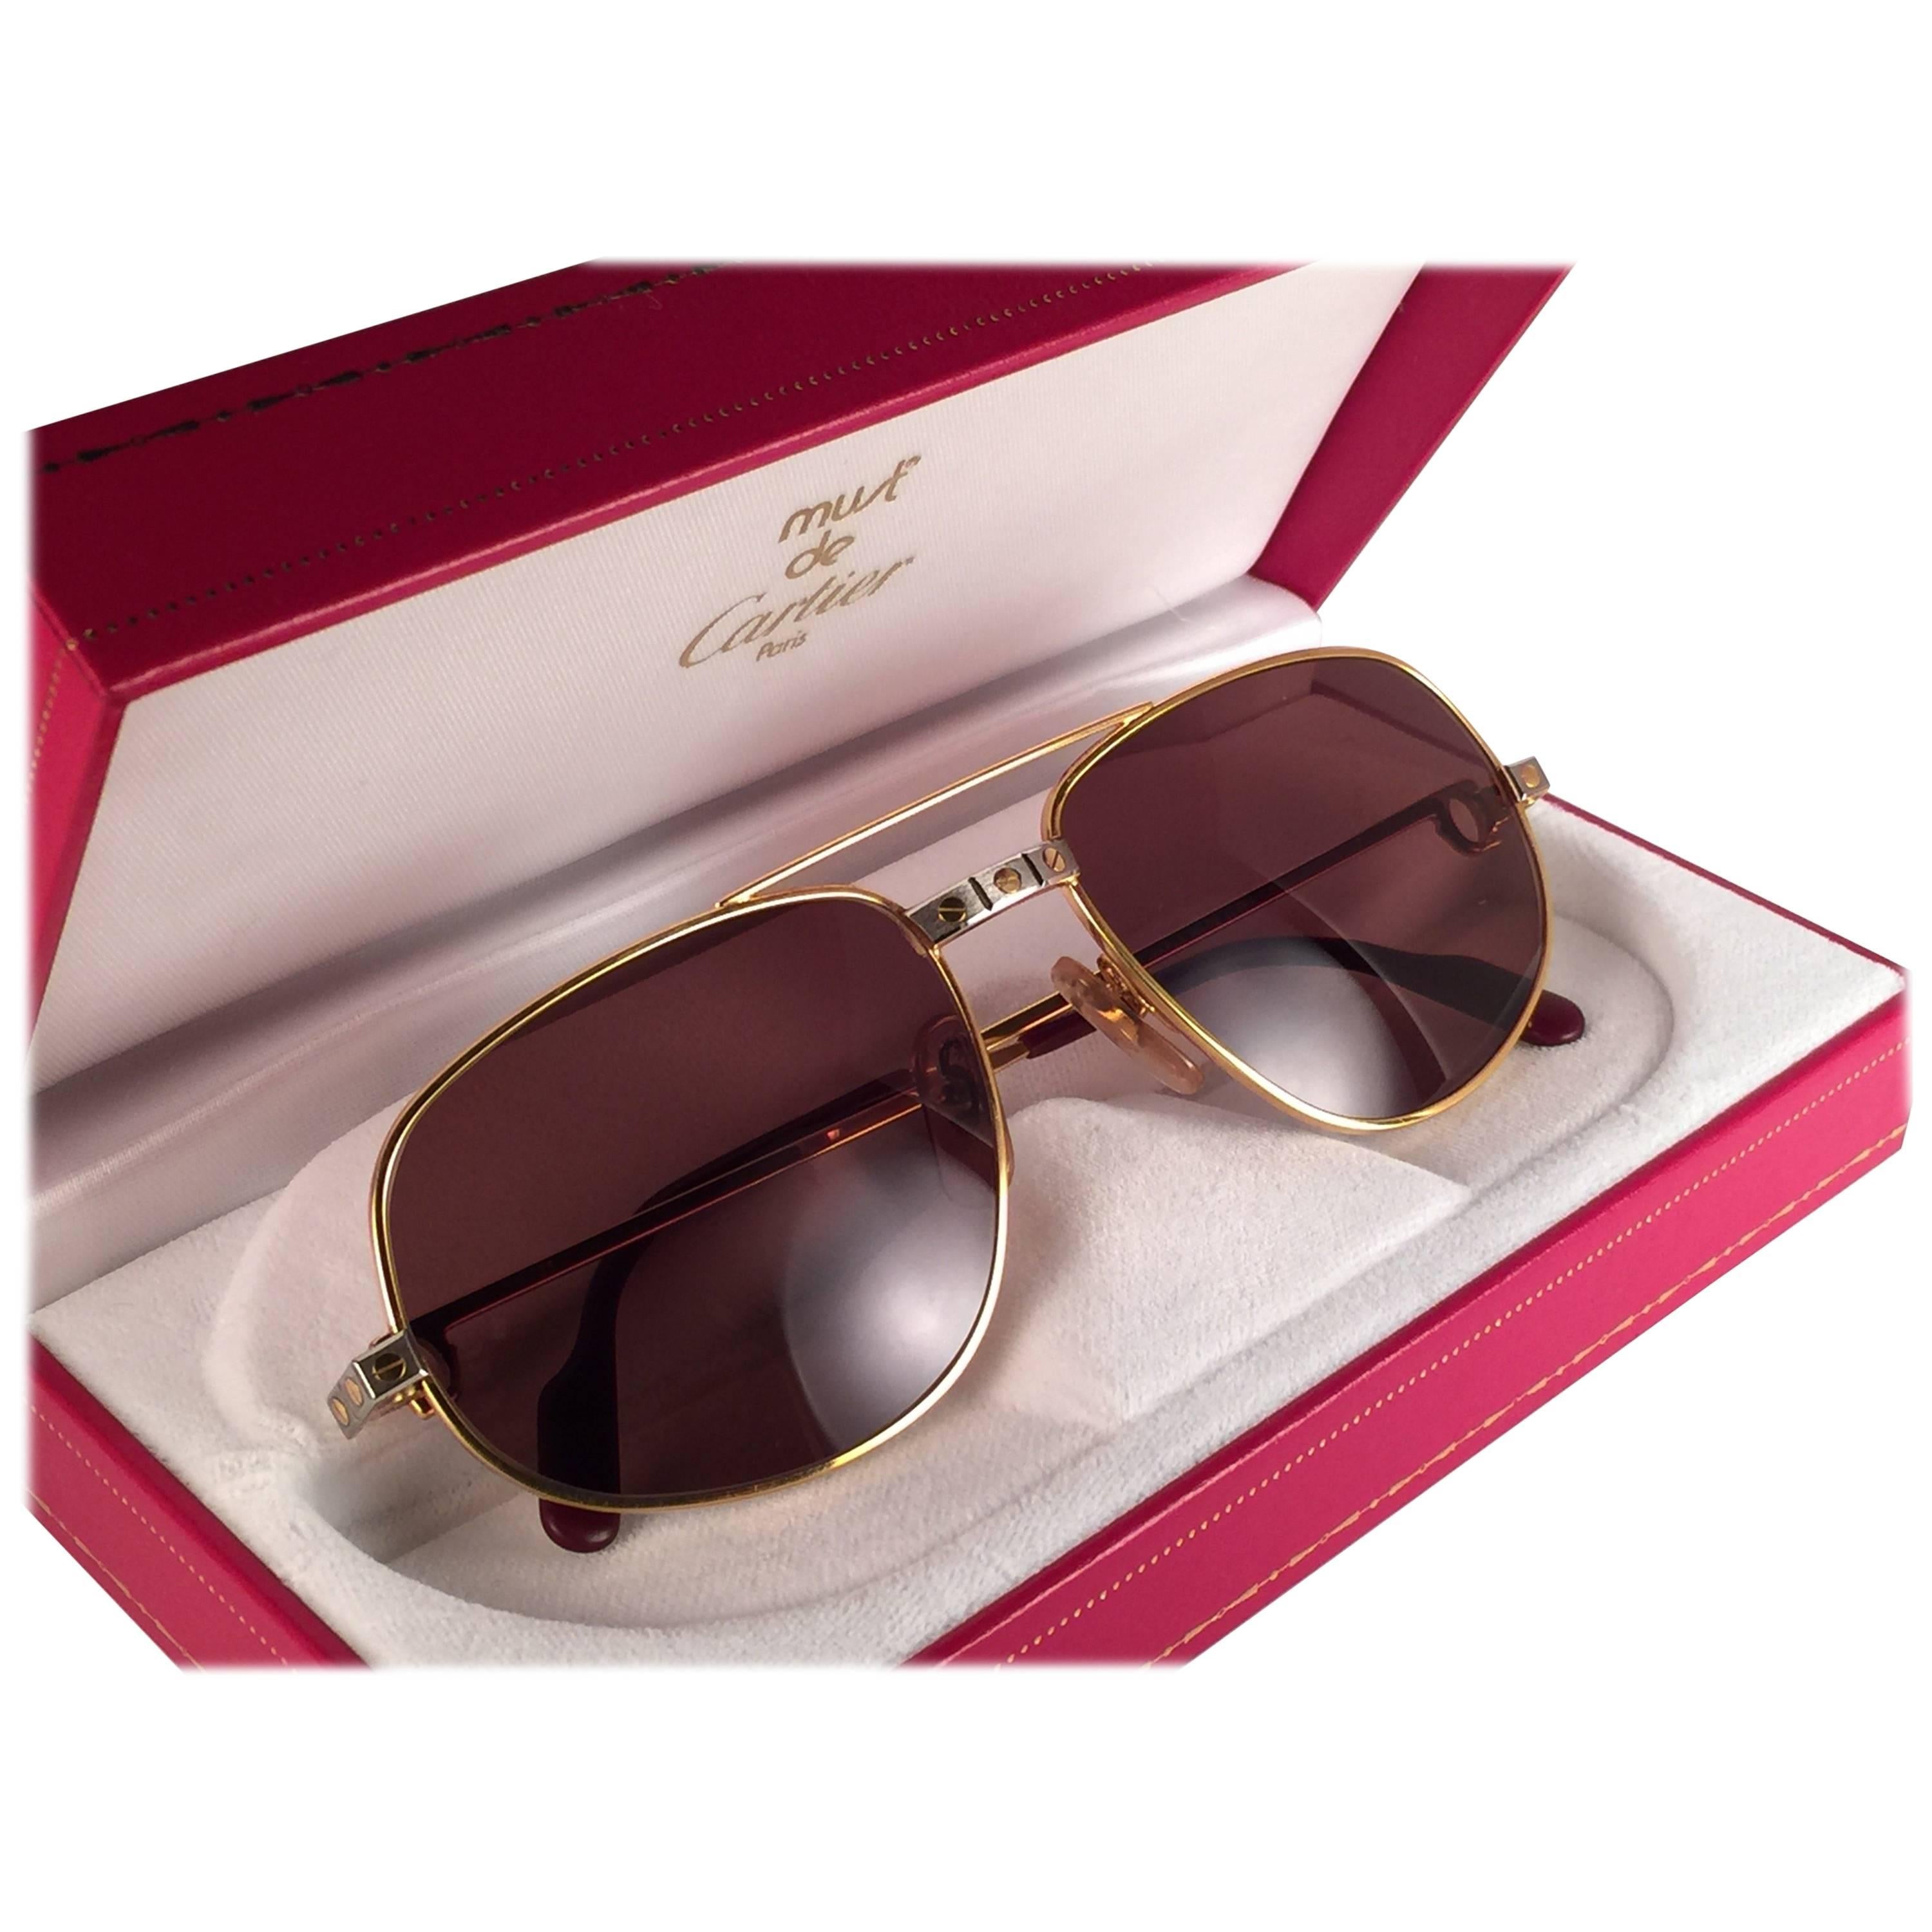 Vintage Cartier Romance Santos sunglasses with the honey brown (uv protection)lenses.  Frame is with the front and sides in yellow and white gold. All hallmarks. Red enamel with Cartier gold signs on the ear paddles. Both arms sport the C from